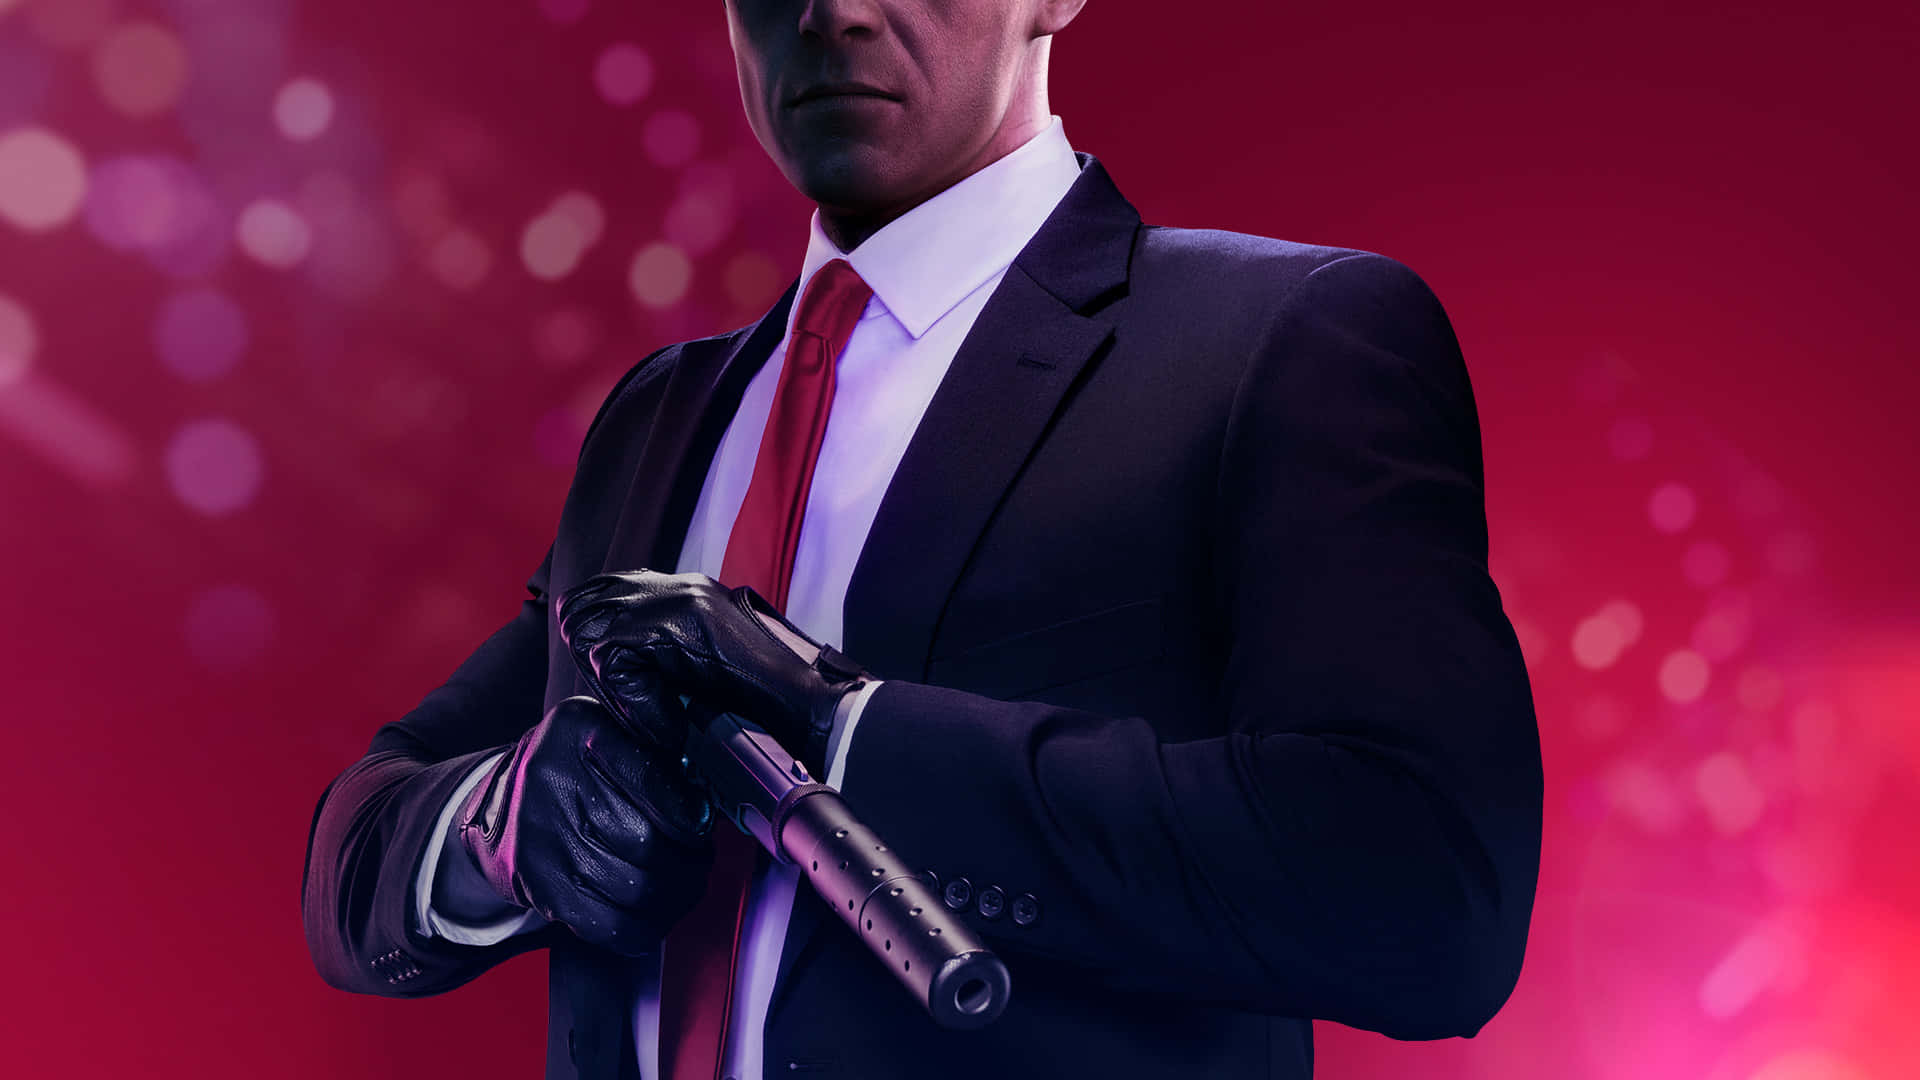 Image  Hitman 2 - The Future of Stealth